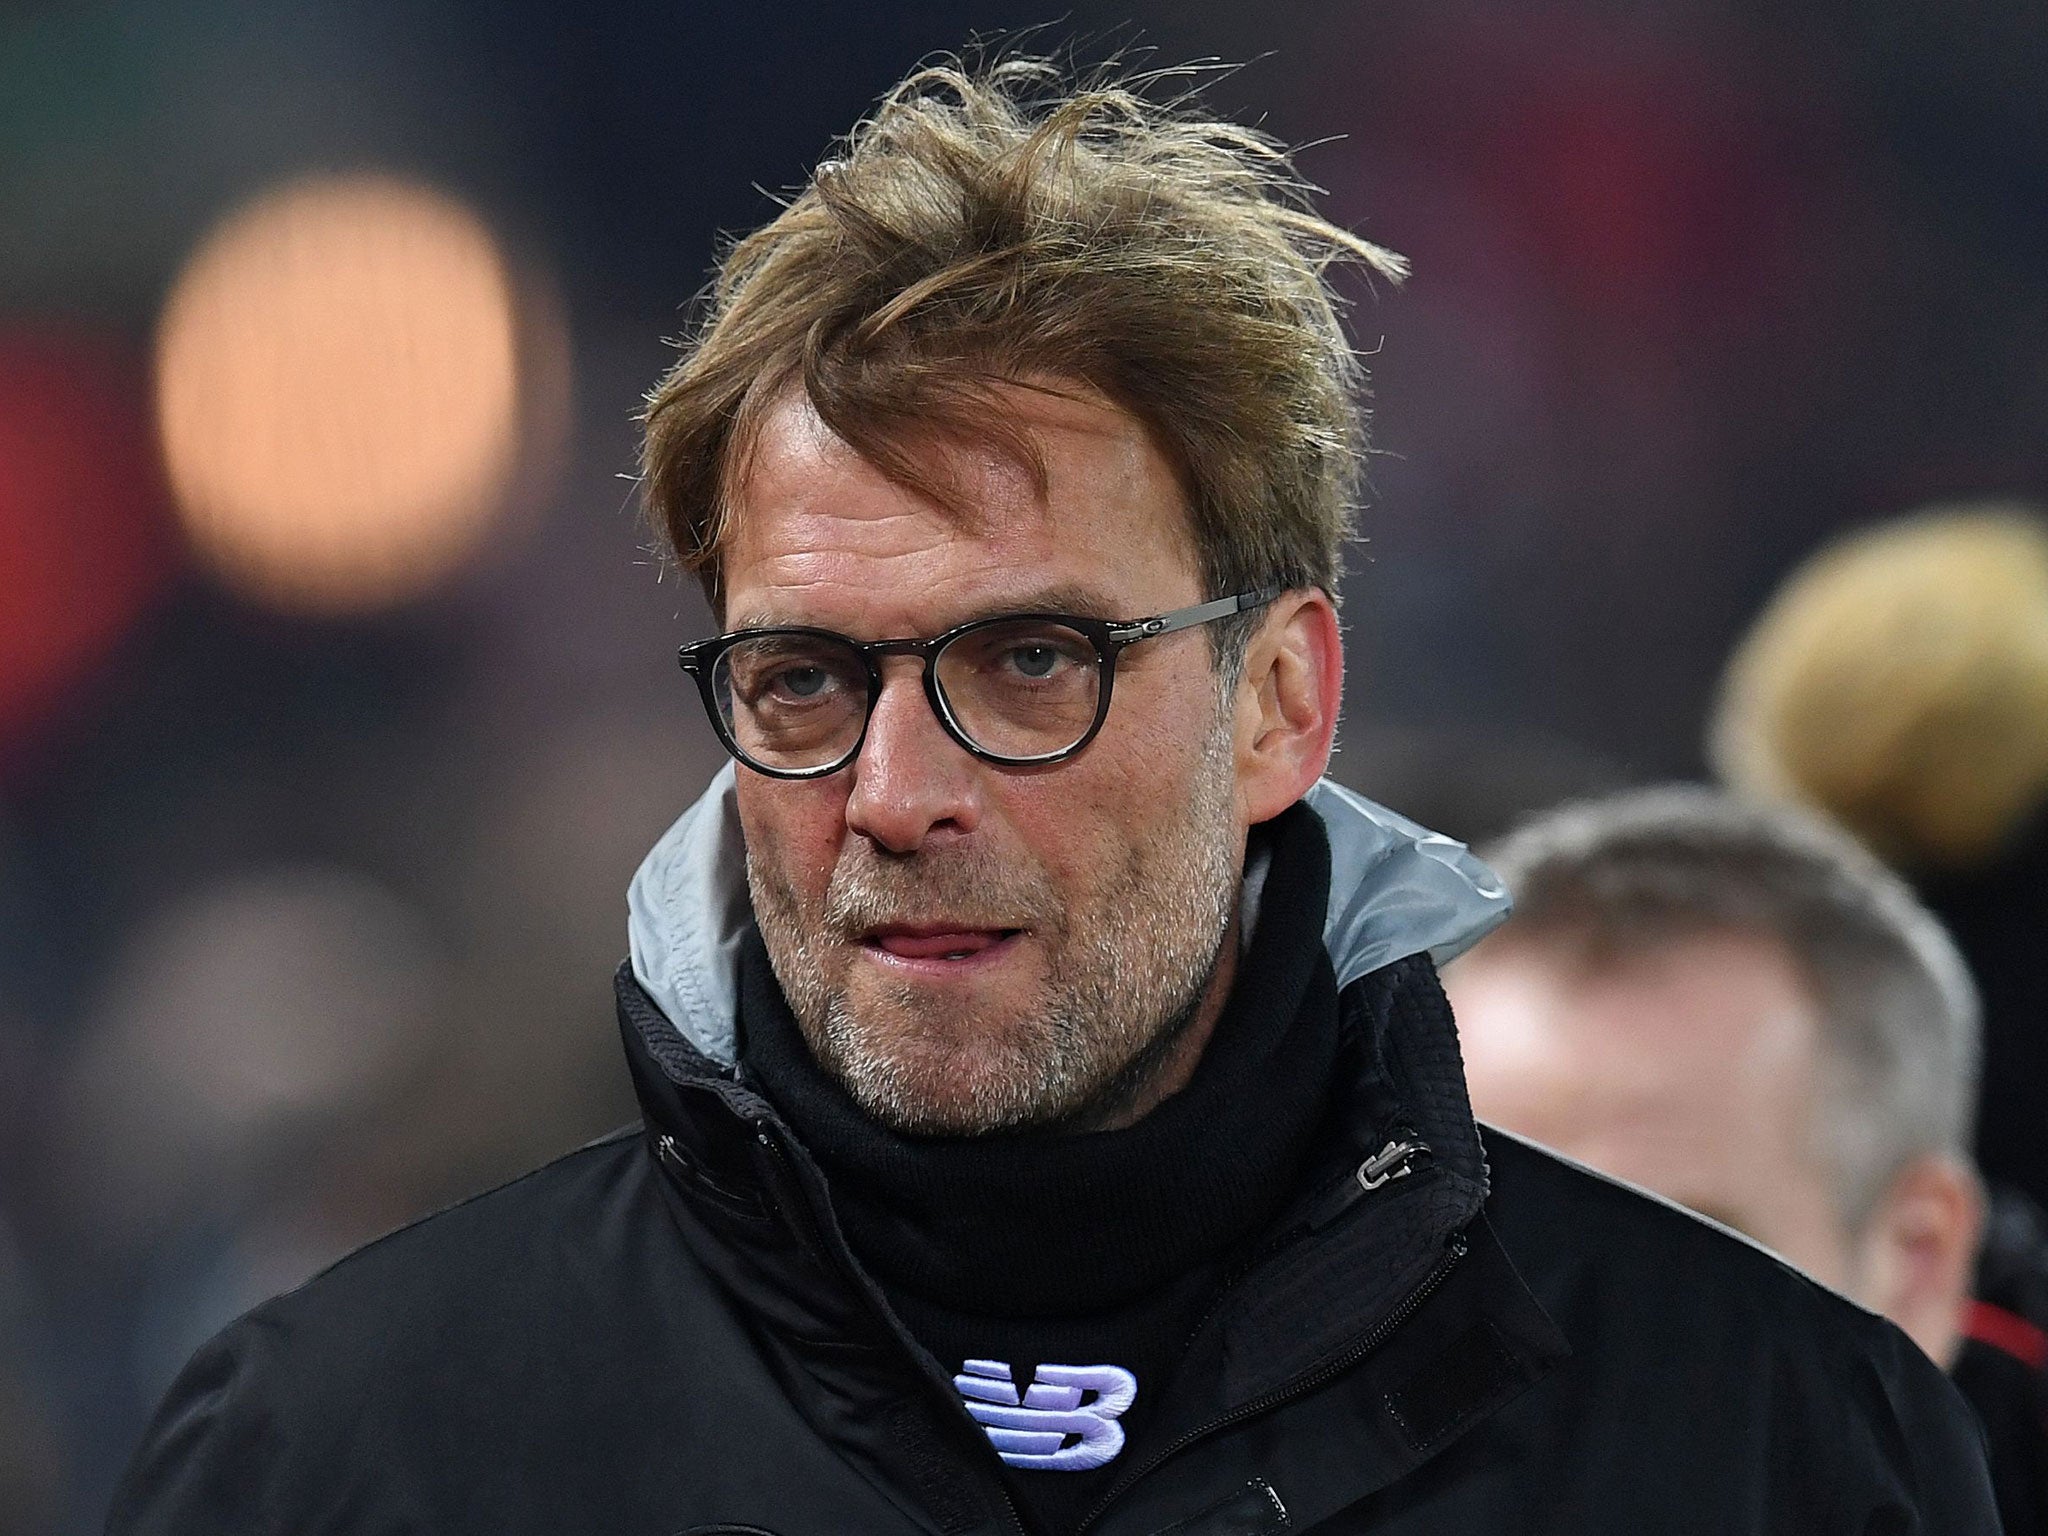 Klopp saw enough signs in the Southampton defeat to keep him optimistic